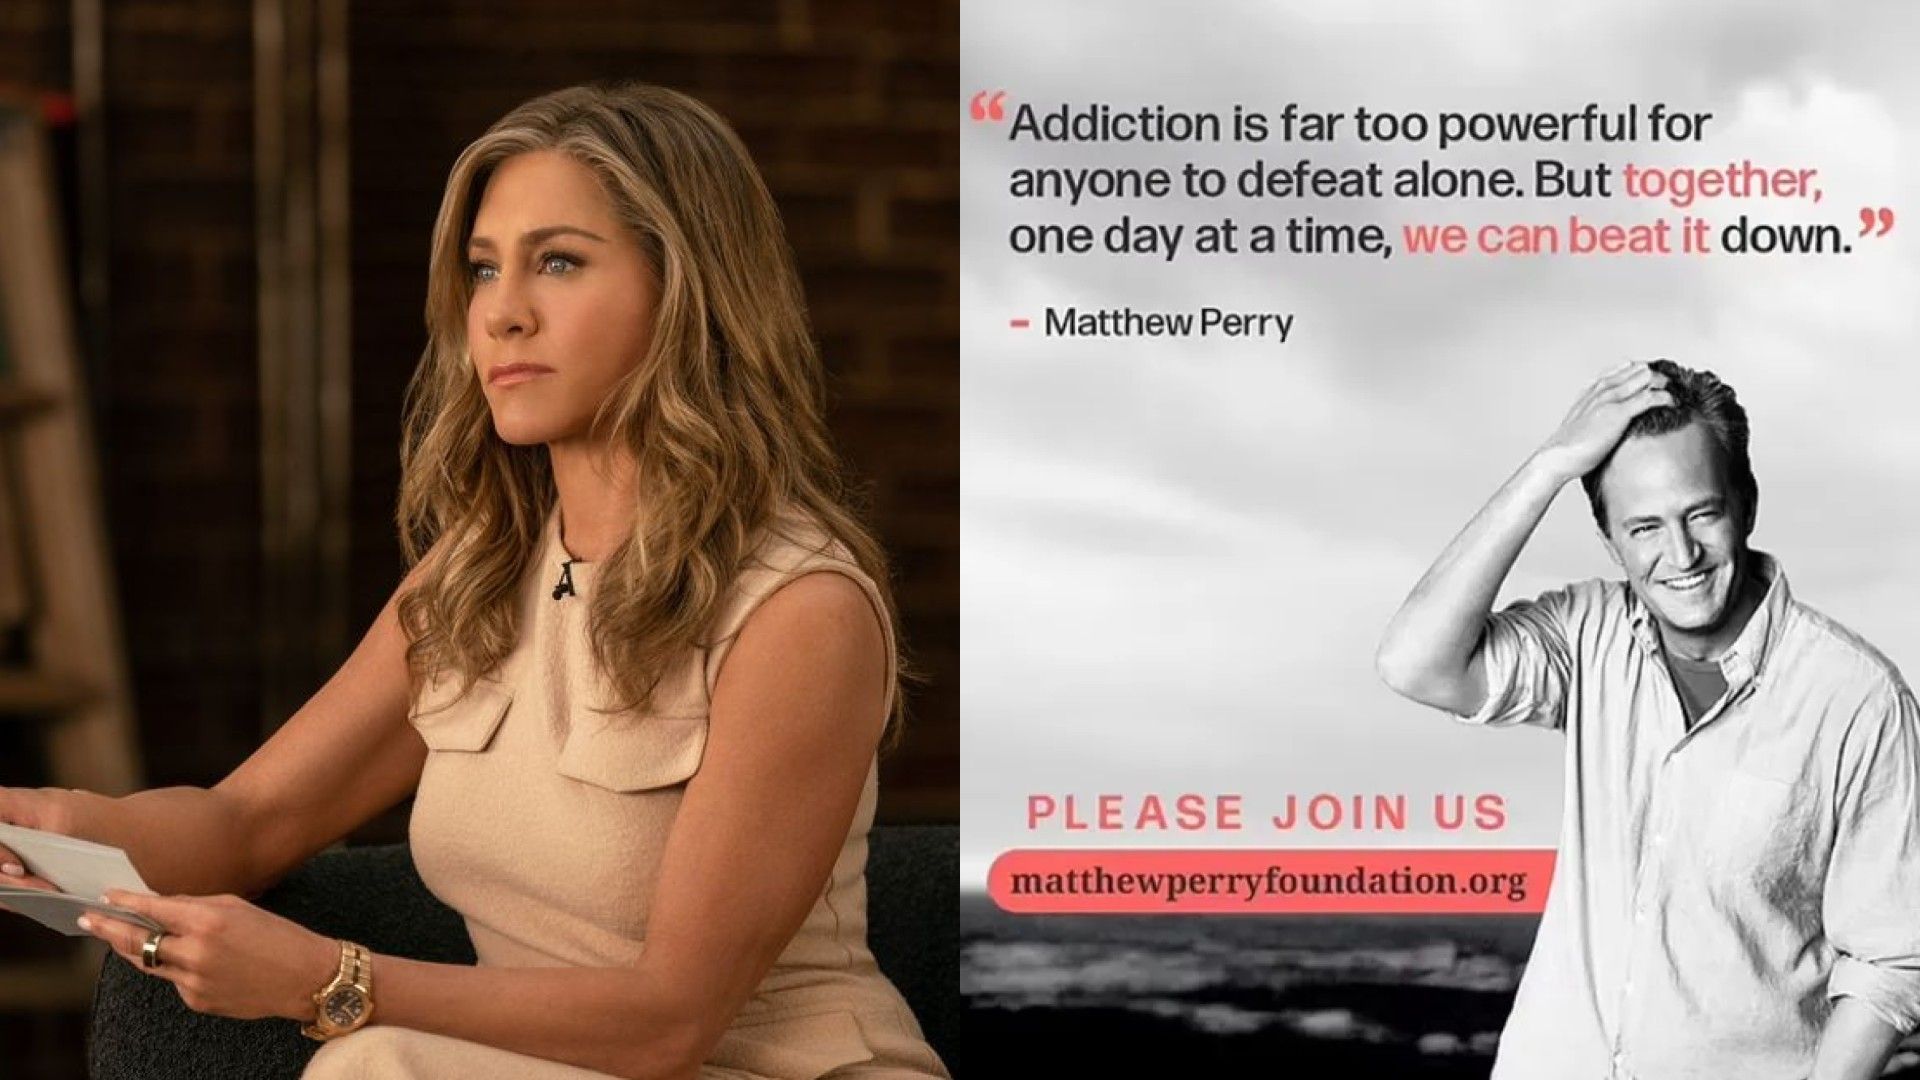 Jennifer Aniston Urges Support for Matthew Perry's Charity Foundation